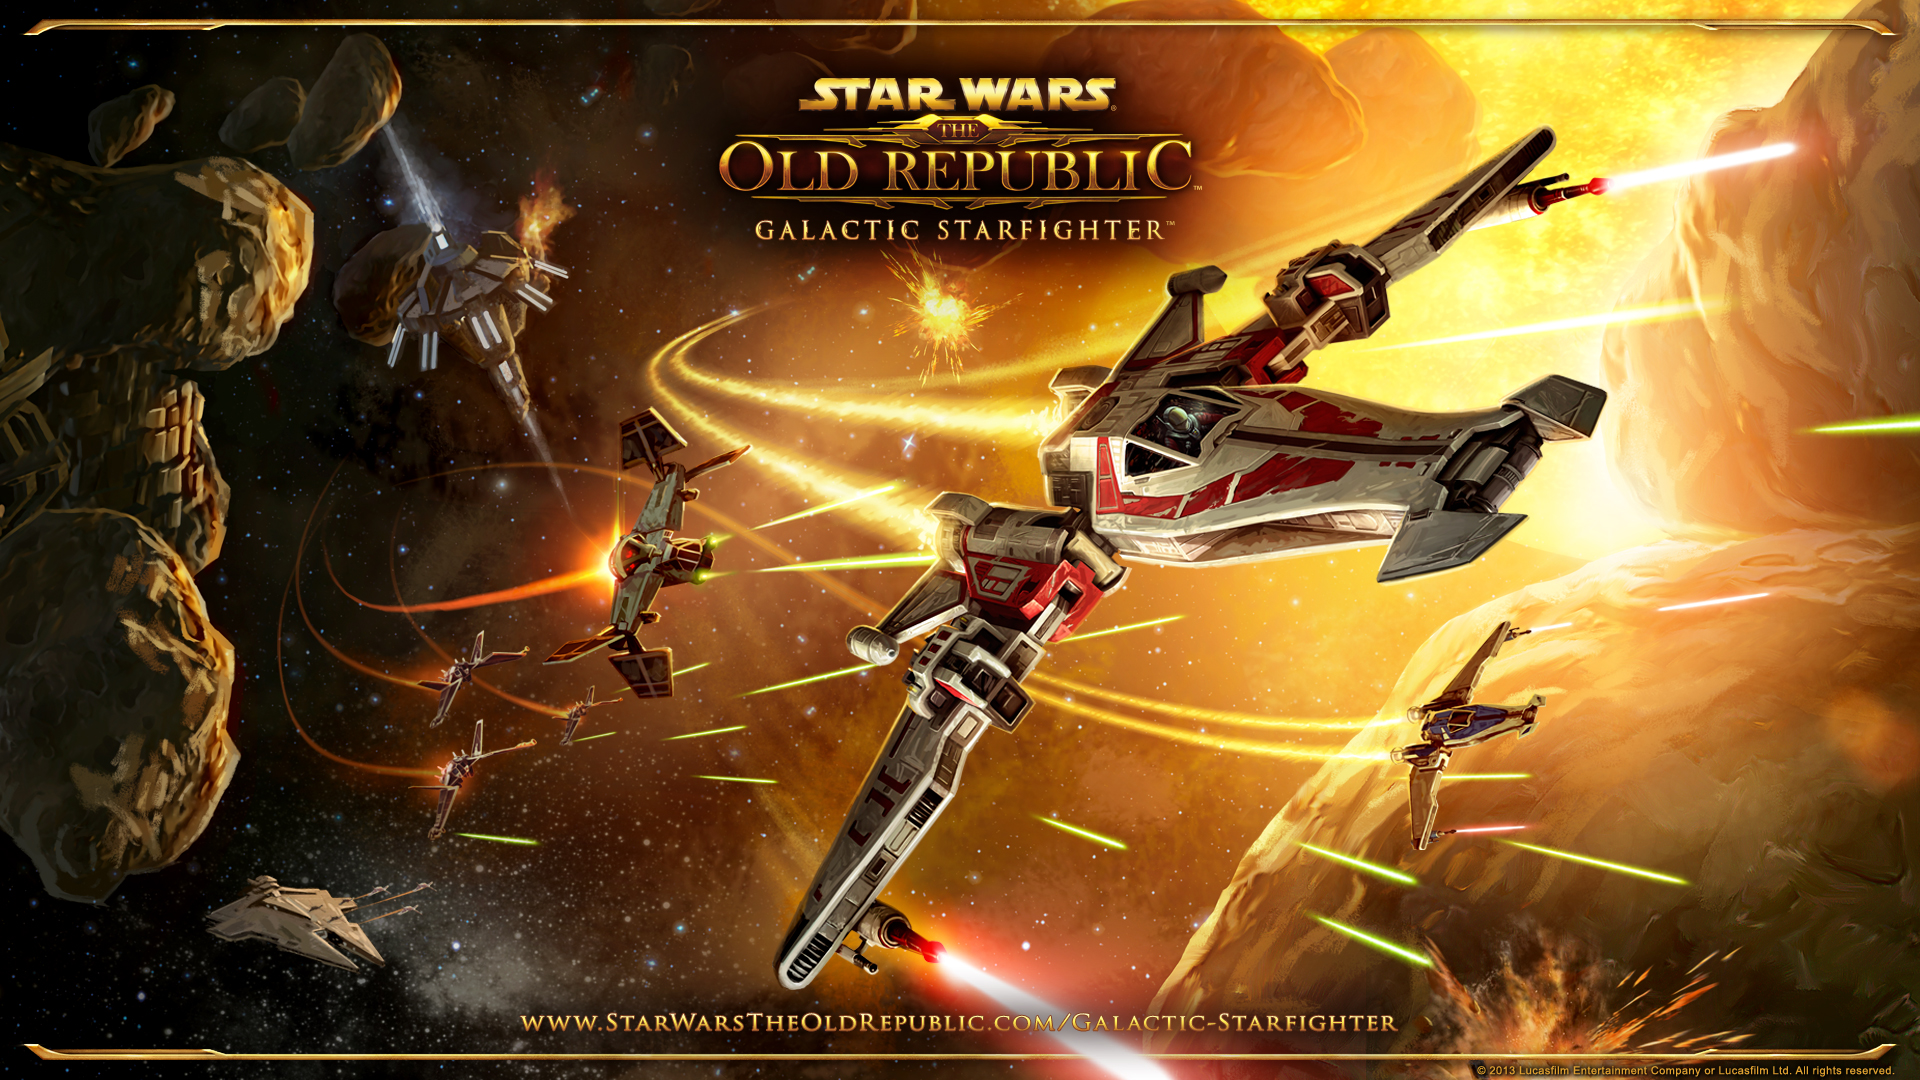 Star Wars: The Old Republic: Galactic Starfighter. Star Wars: The Old Republic